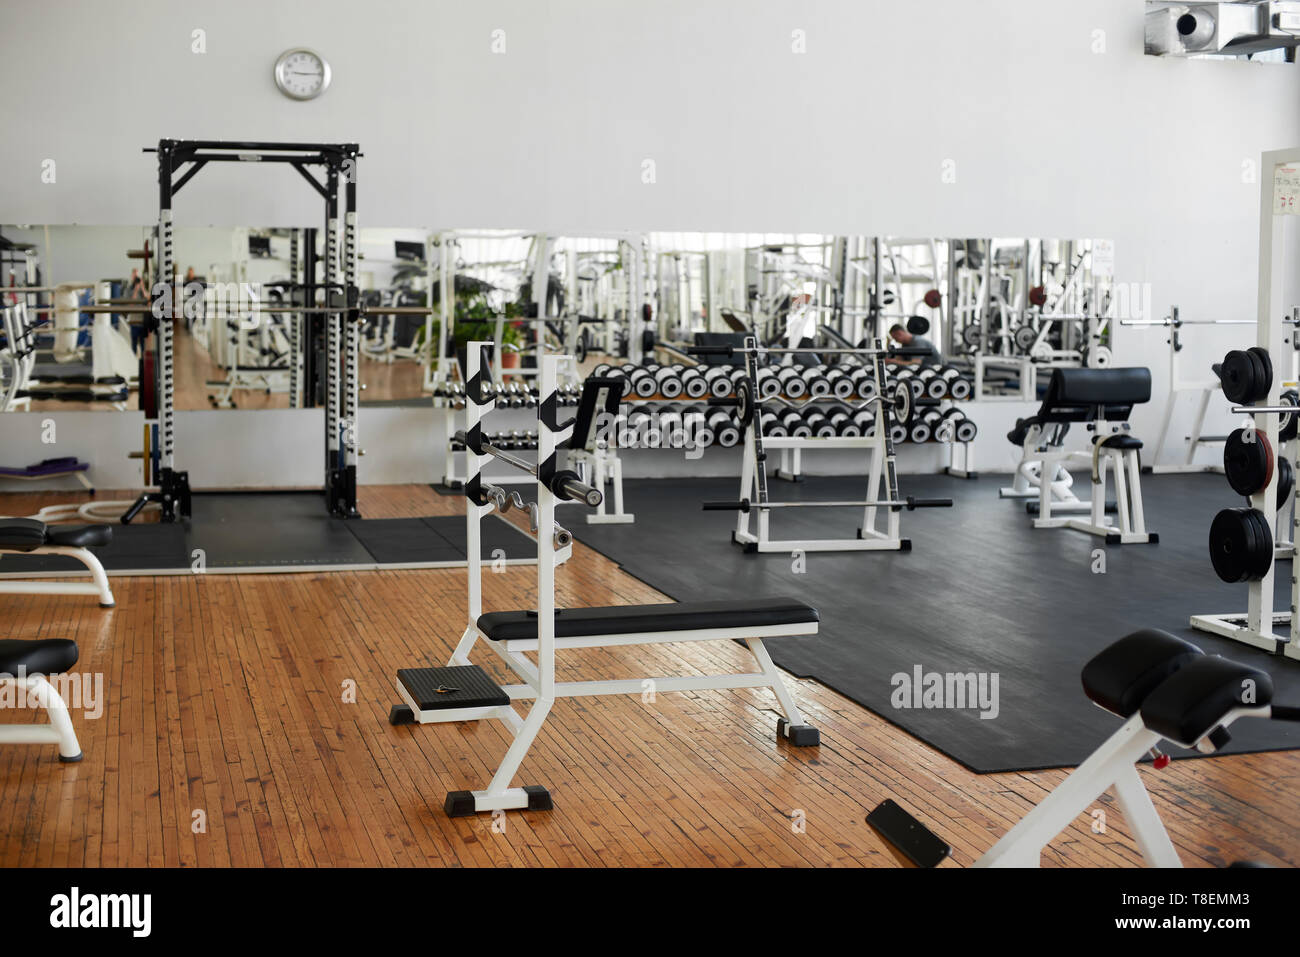 Gym interior with equipment. Modern fitness center with training equipment. Commercial gym interior design. Stock Photo